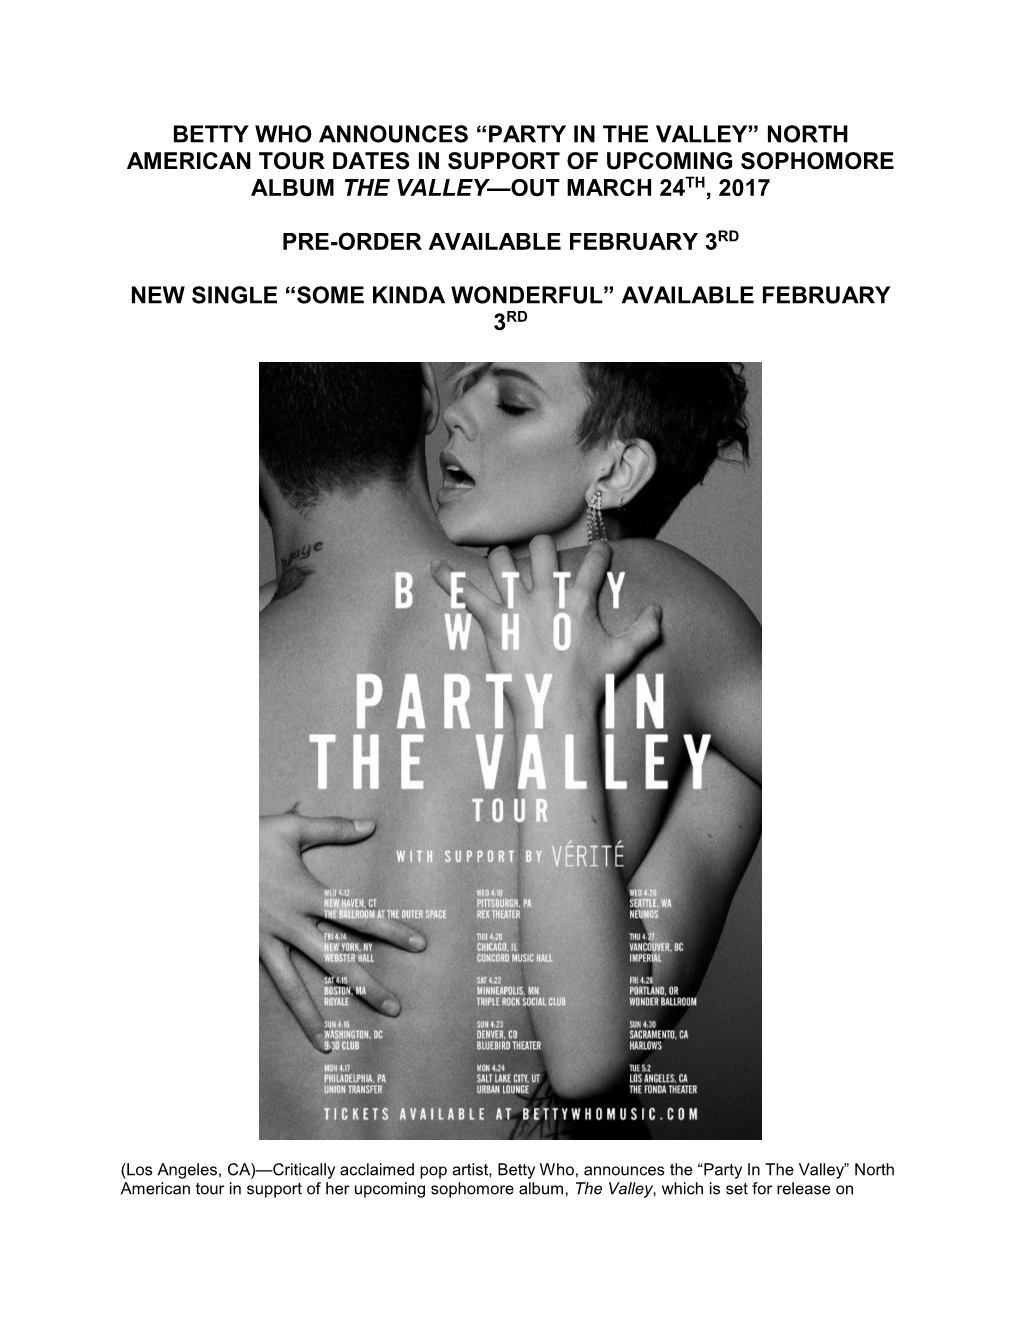 Betty Who Announces “Party in the Valley” North American Tour Dates in Support of Upcoming Sophomore Album the Valley—Out March 24Th, 2017